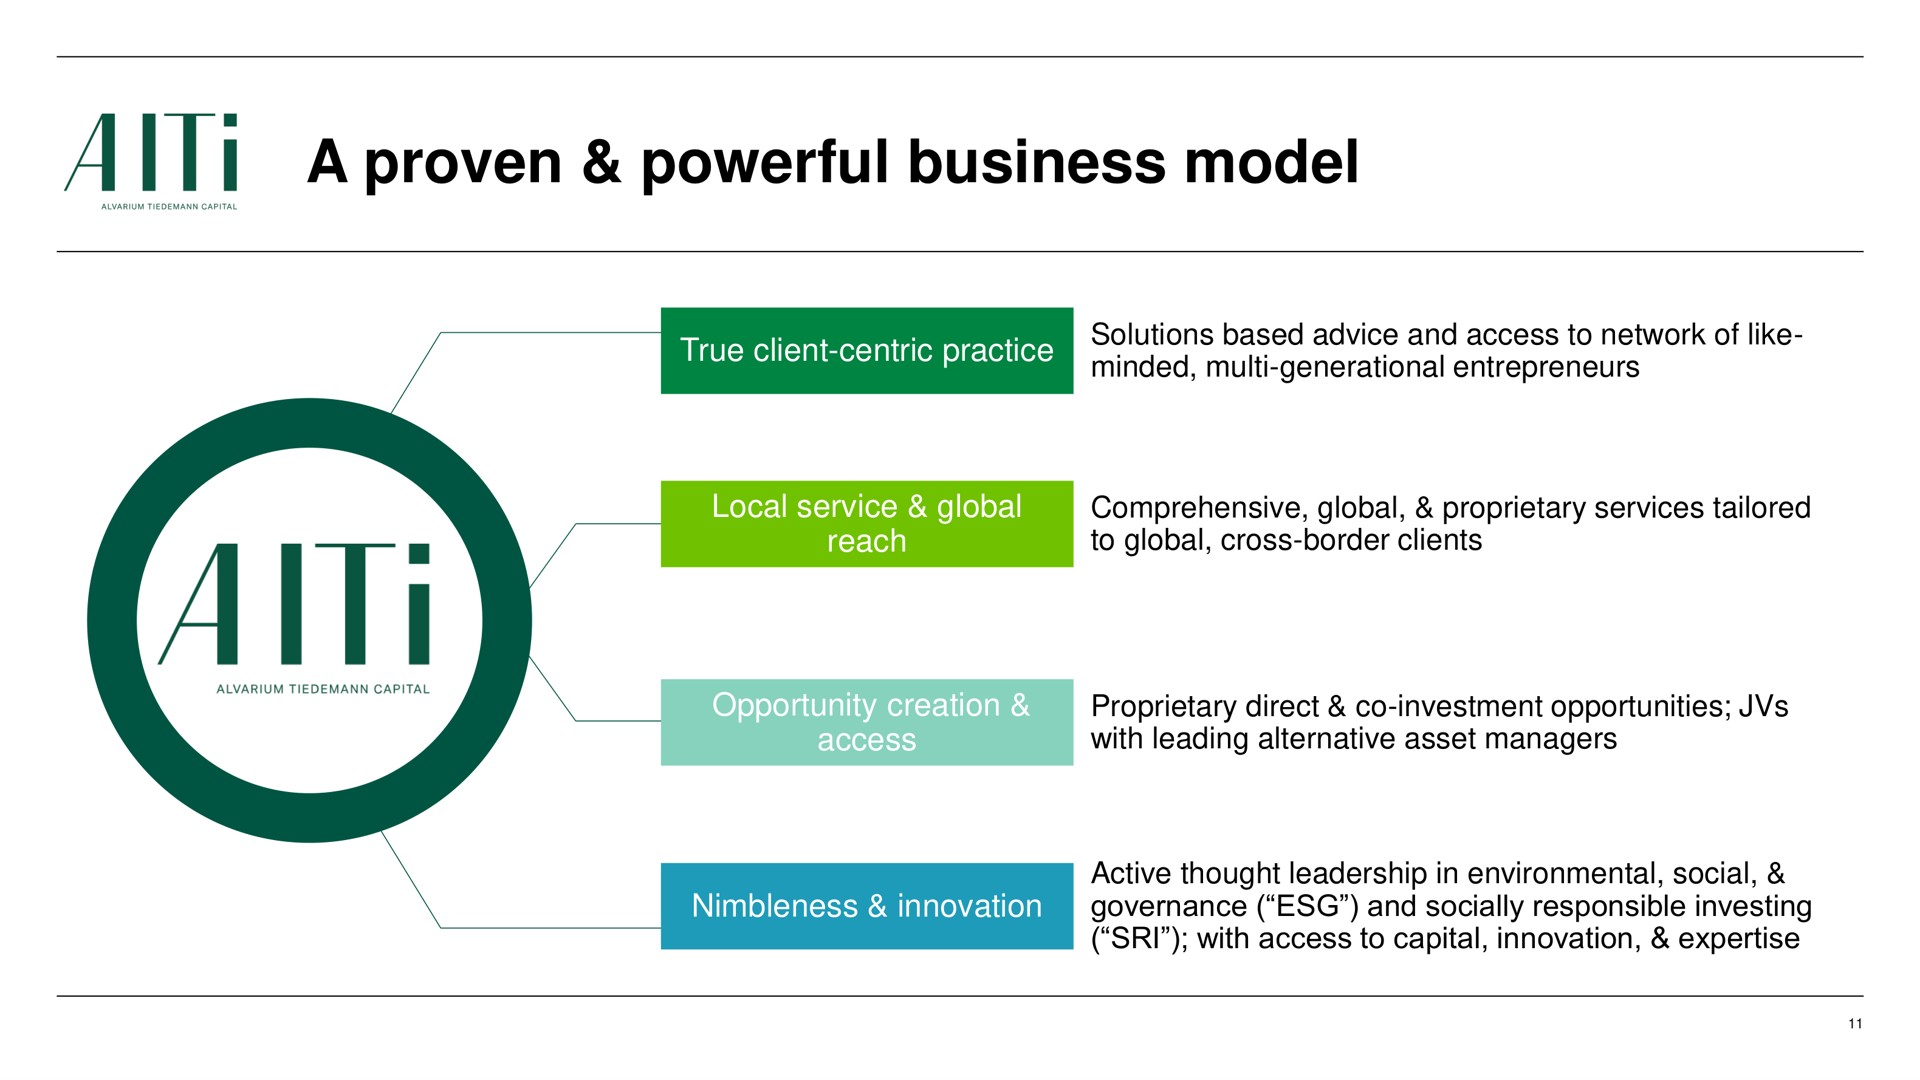 a proven powerful business model | AlTi